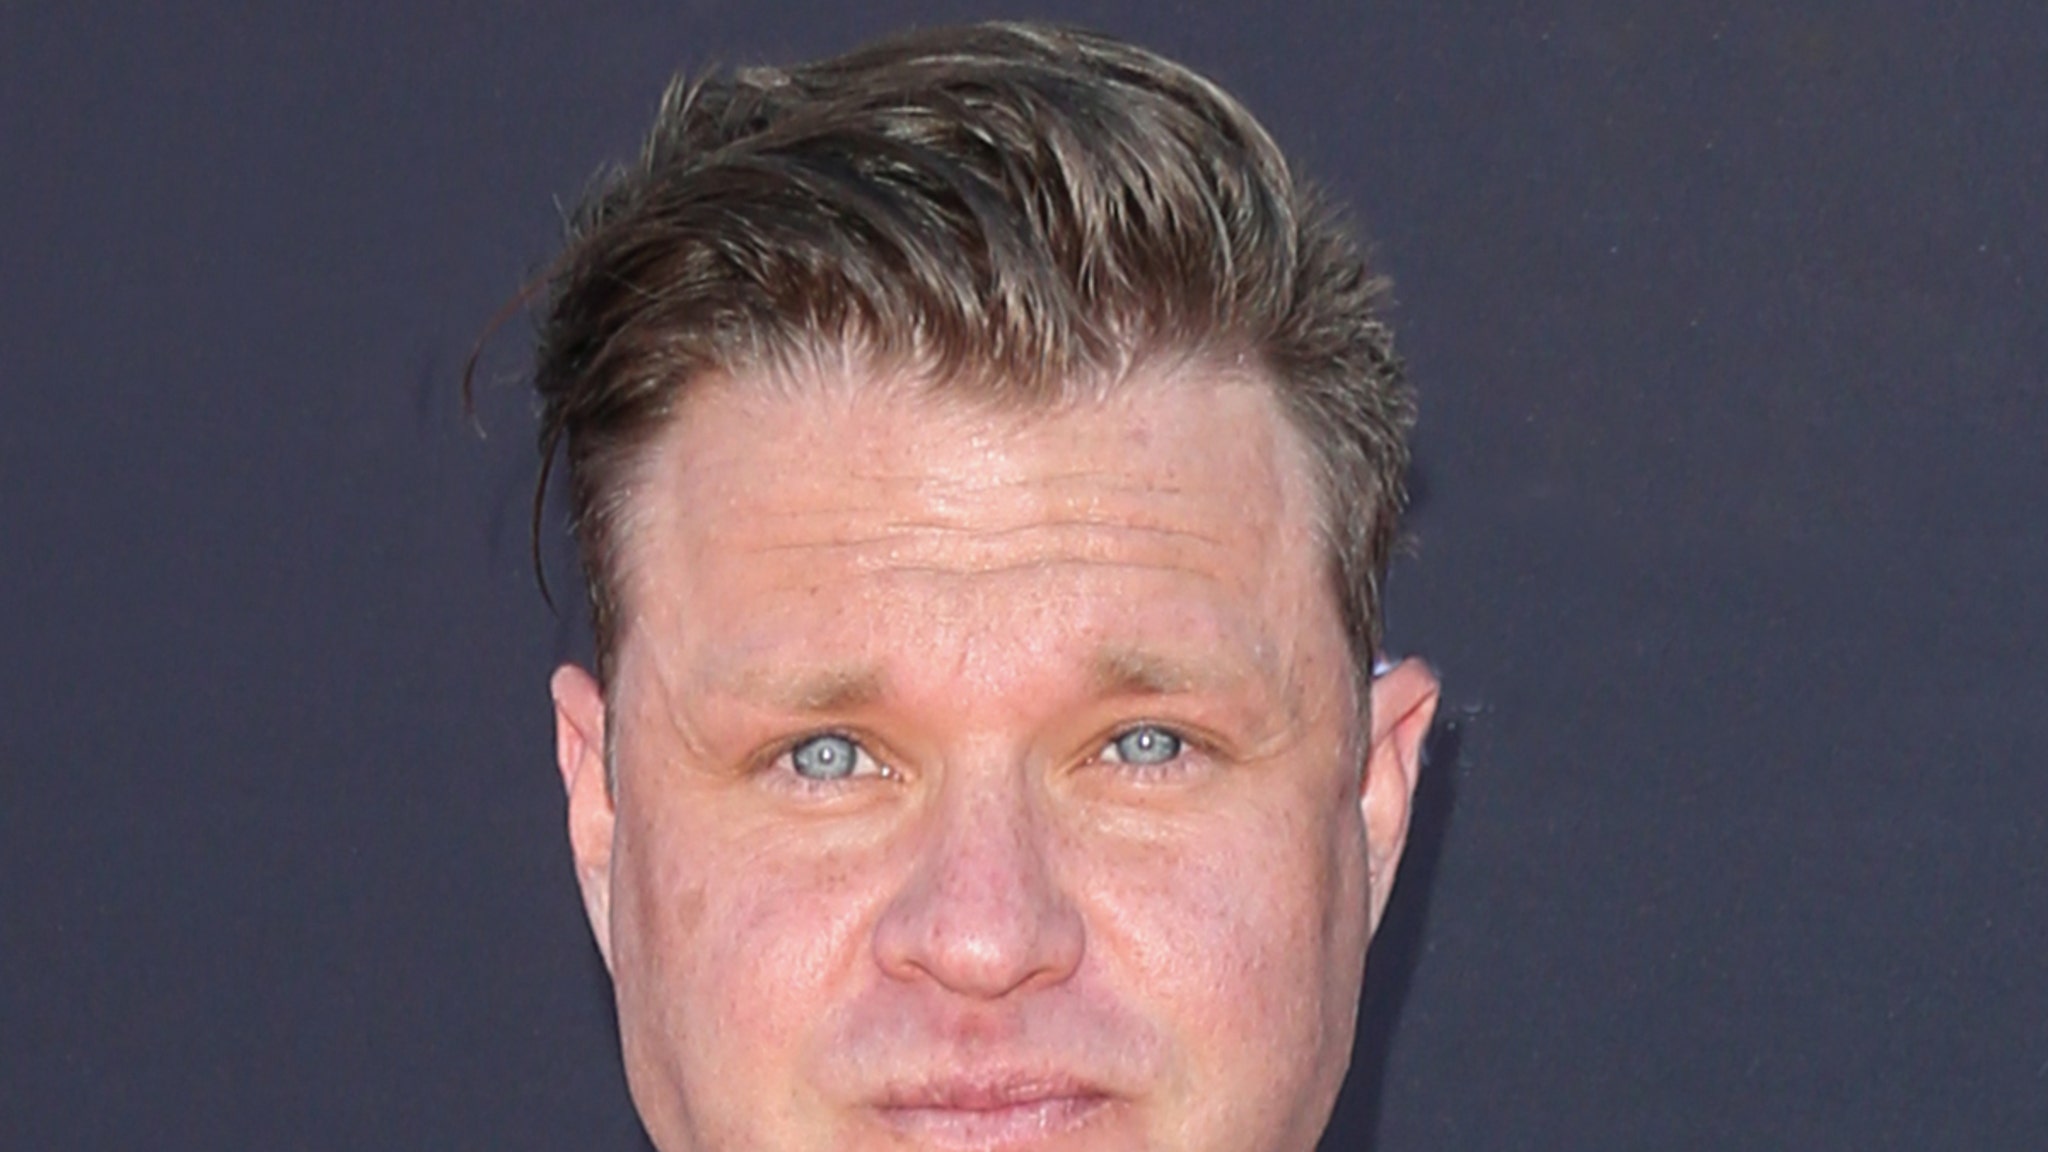 Zachery Ty Bryan pleads guilty in domestic violence case and gets parole